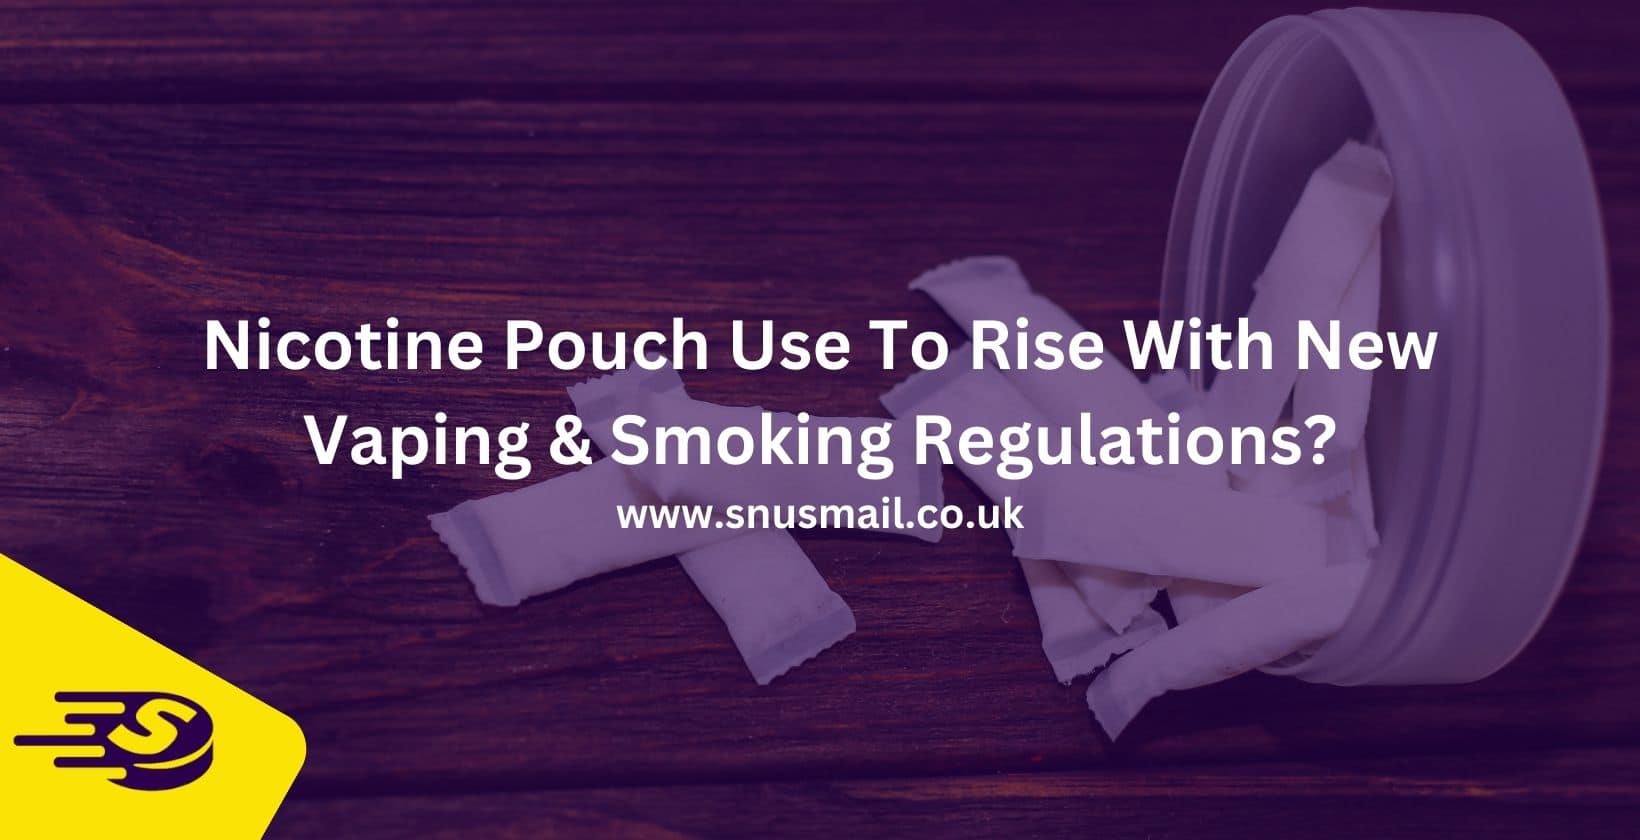 nicotine pouch use to rise with new regulations?